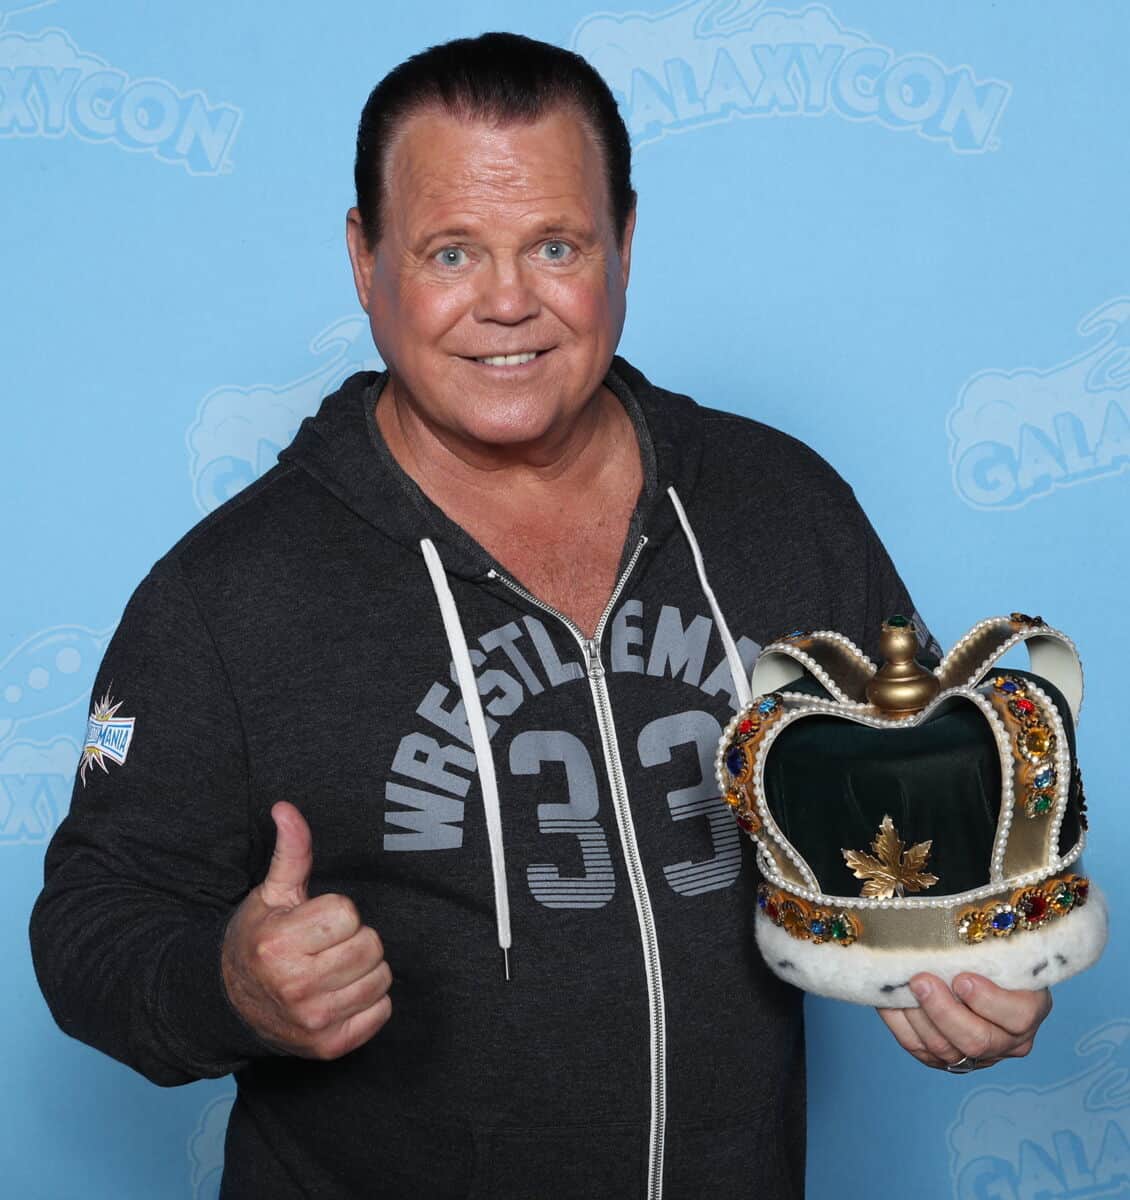 Jerry Lawler net worth in Sports & Athletes category